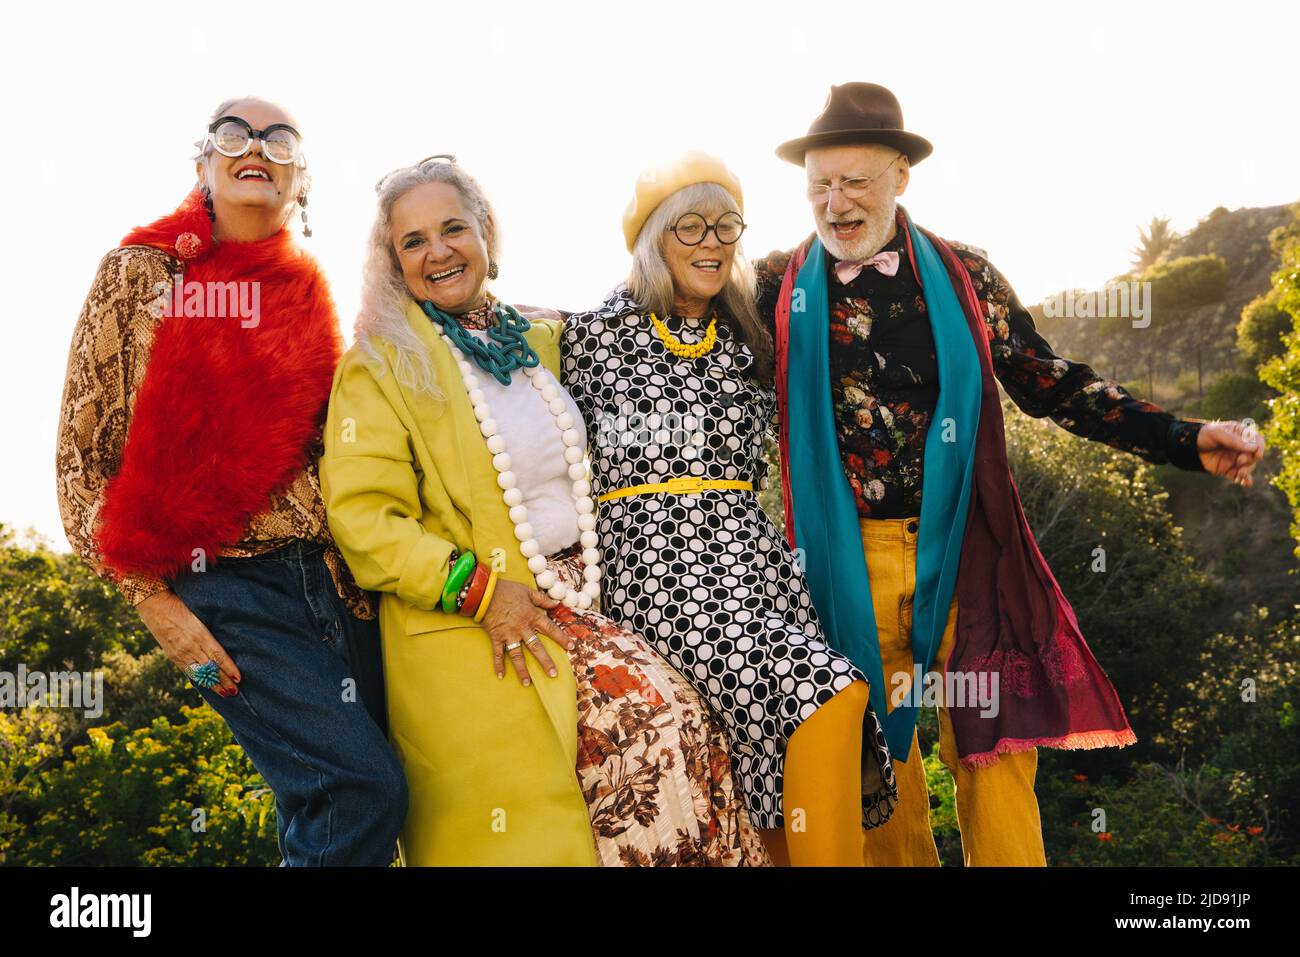 Senior citizens having fun while standing together in a park. Group of cheerful senior friends wearing colourful casual clothing. Carefree elderly peo Stock Photo